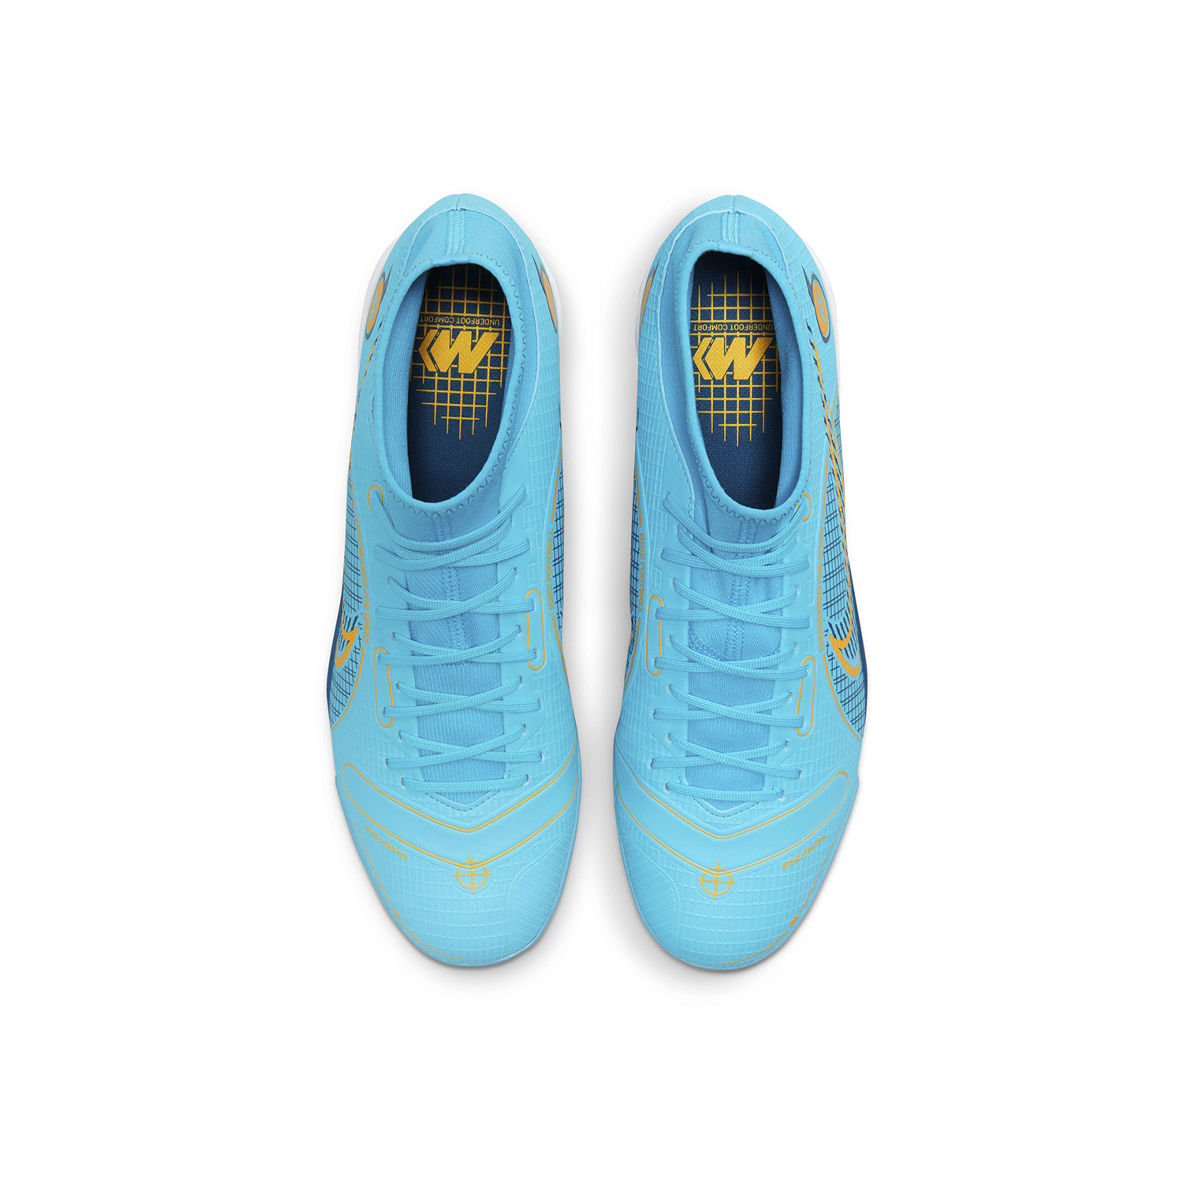 Botines Nike Superfly 8 Academy Tf,  image number null